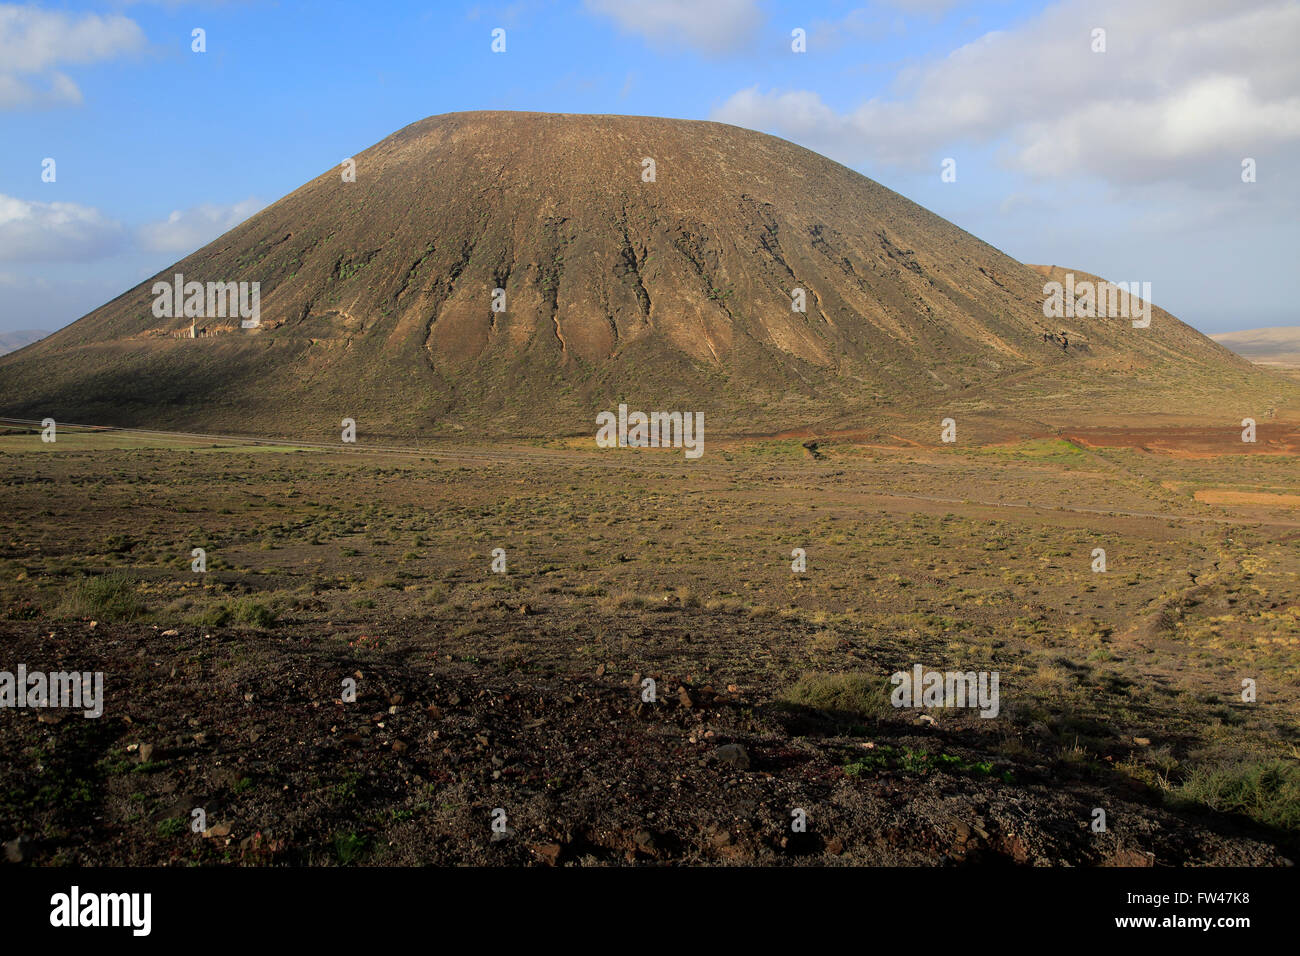 Volcanic cone with, to the left, Miguel de Unamuno monument, Tindaya, Fuerteventura, Canary Islands, Spain Stock Photo